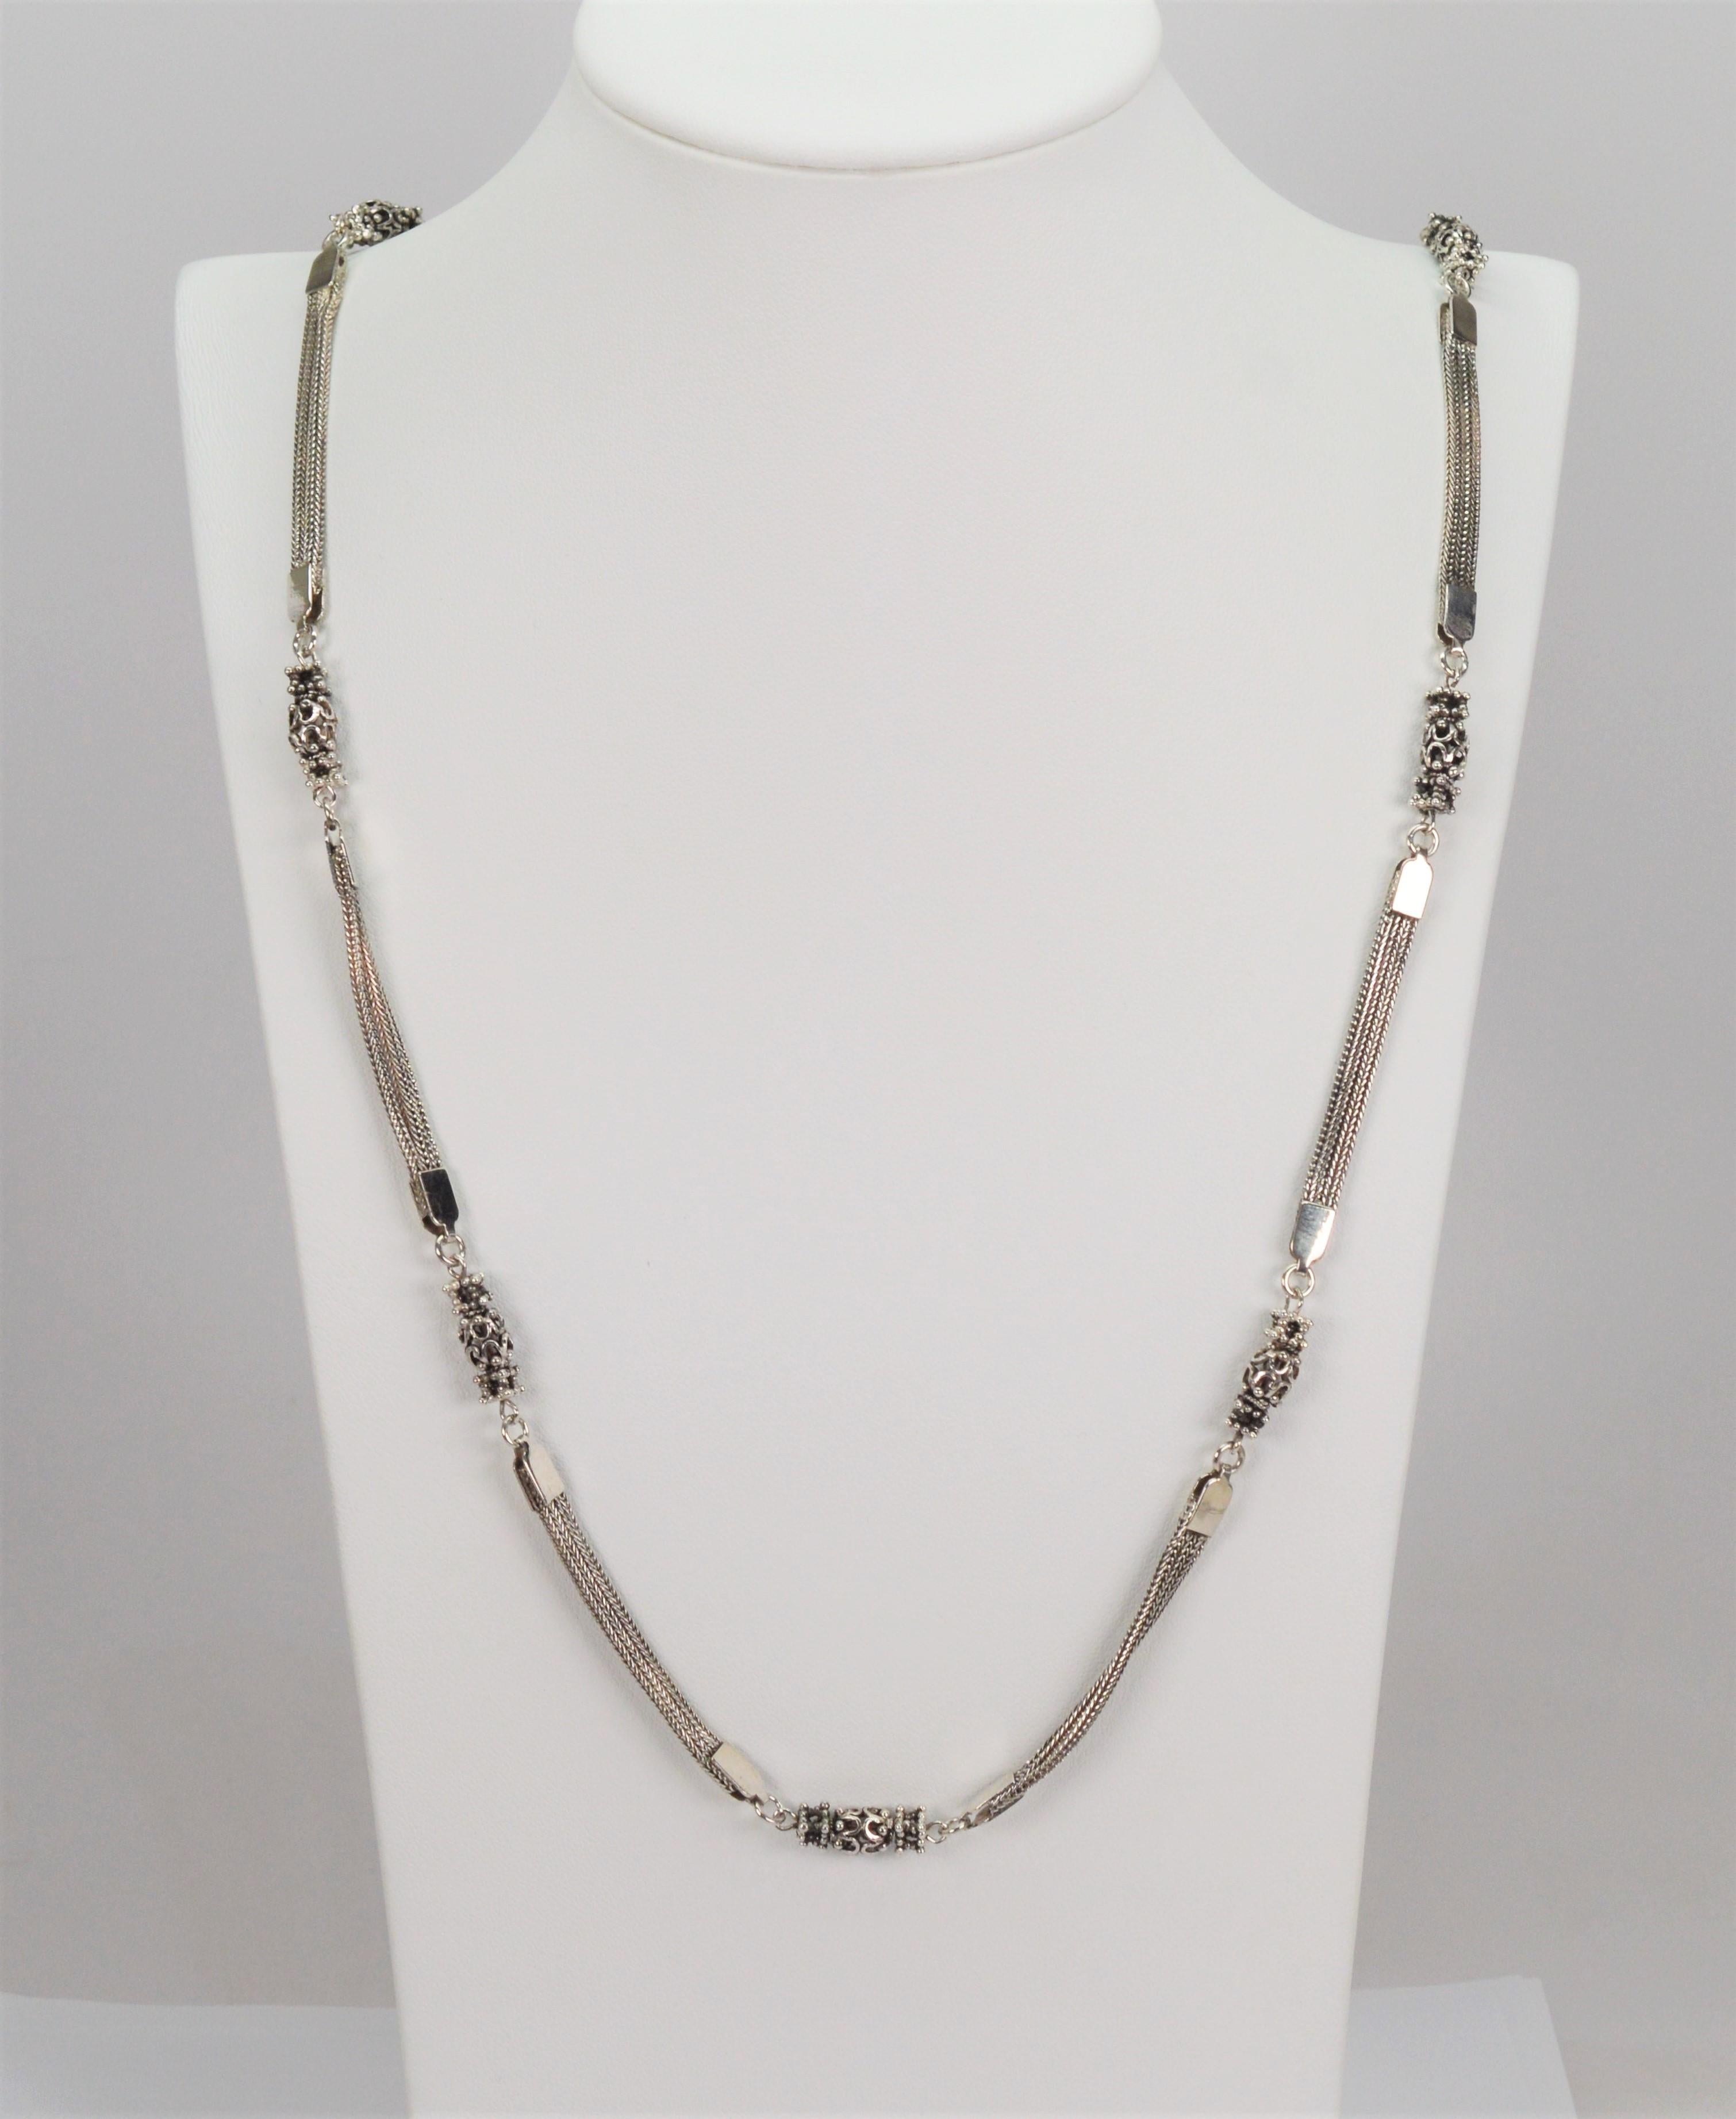 With vintage appeal, intricate sterling silver filigree beads are stationed along this interesting thirty-four inch necklace. Artful crafted by known maker Anatoli, connecting triple foxtail chain sections are each capped with silver findings and